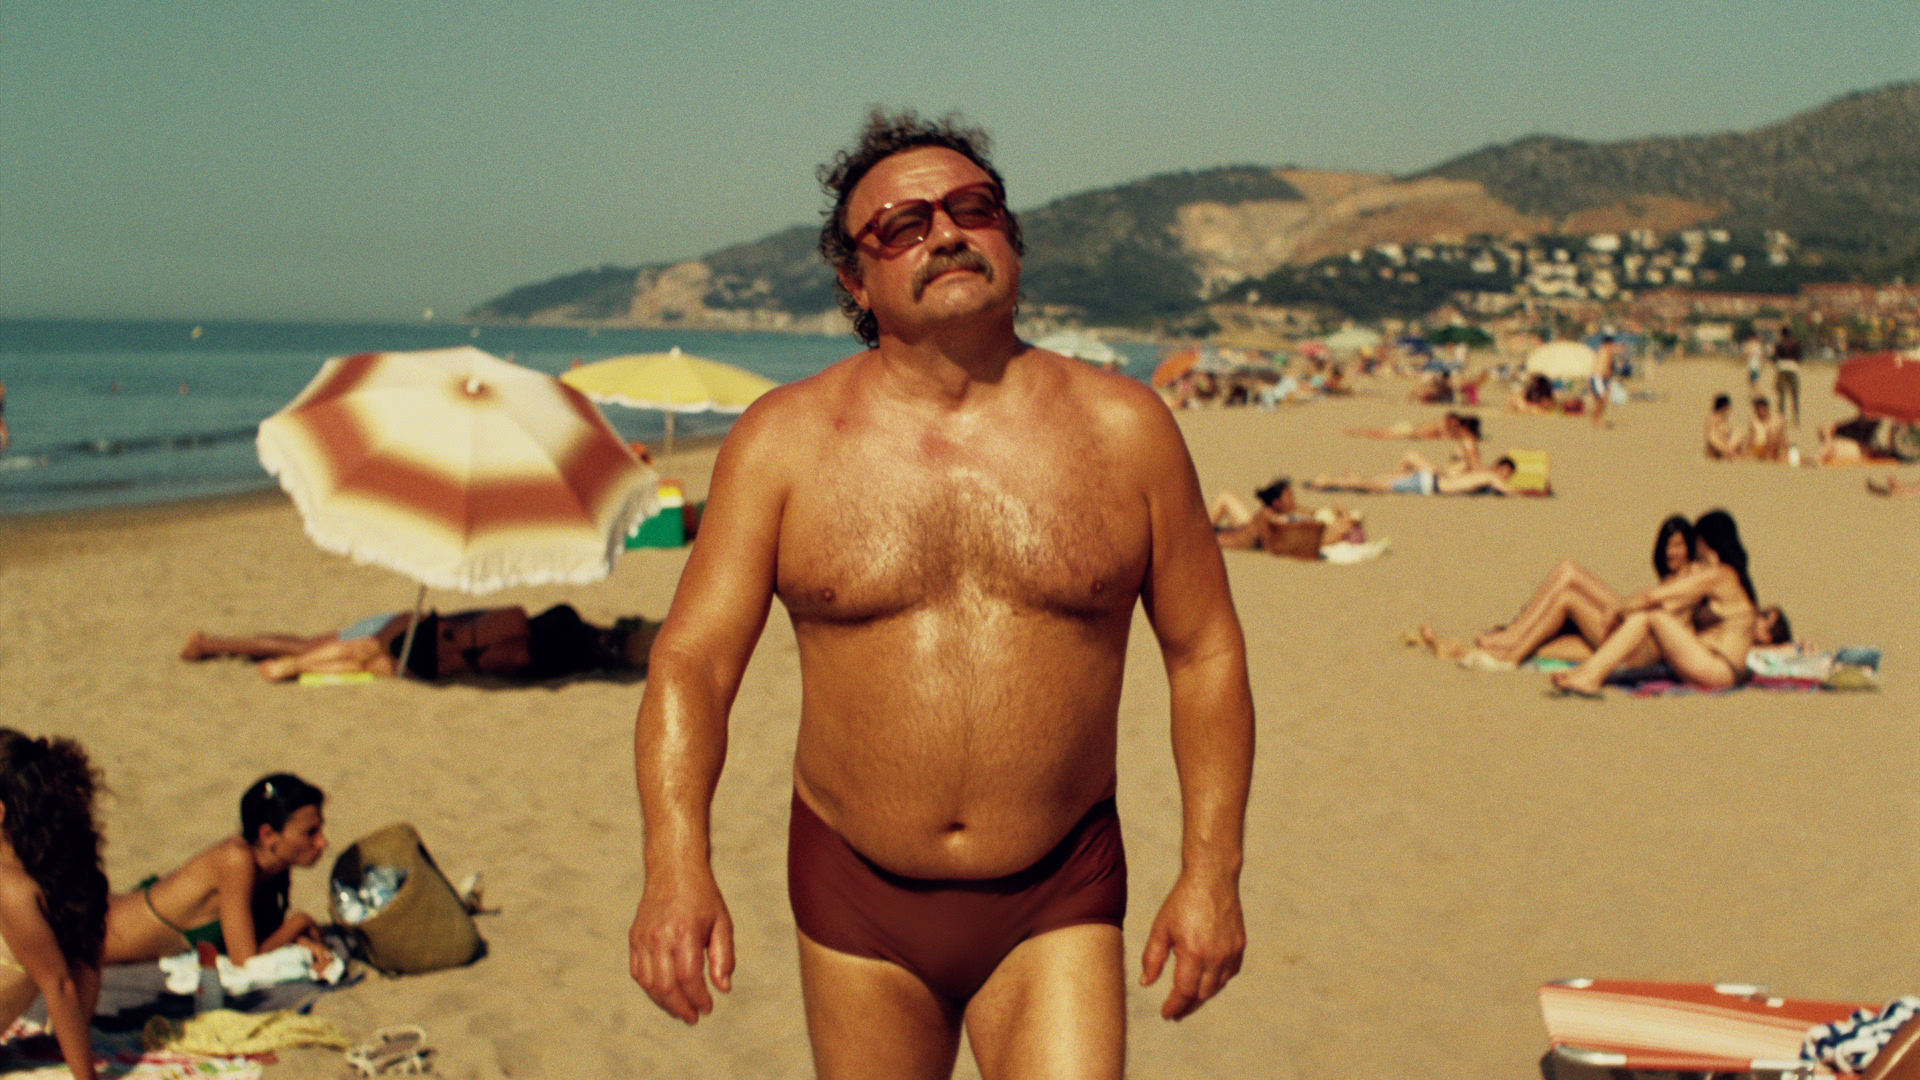 Southern comfort commercial fat guy in speedo